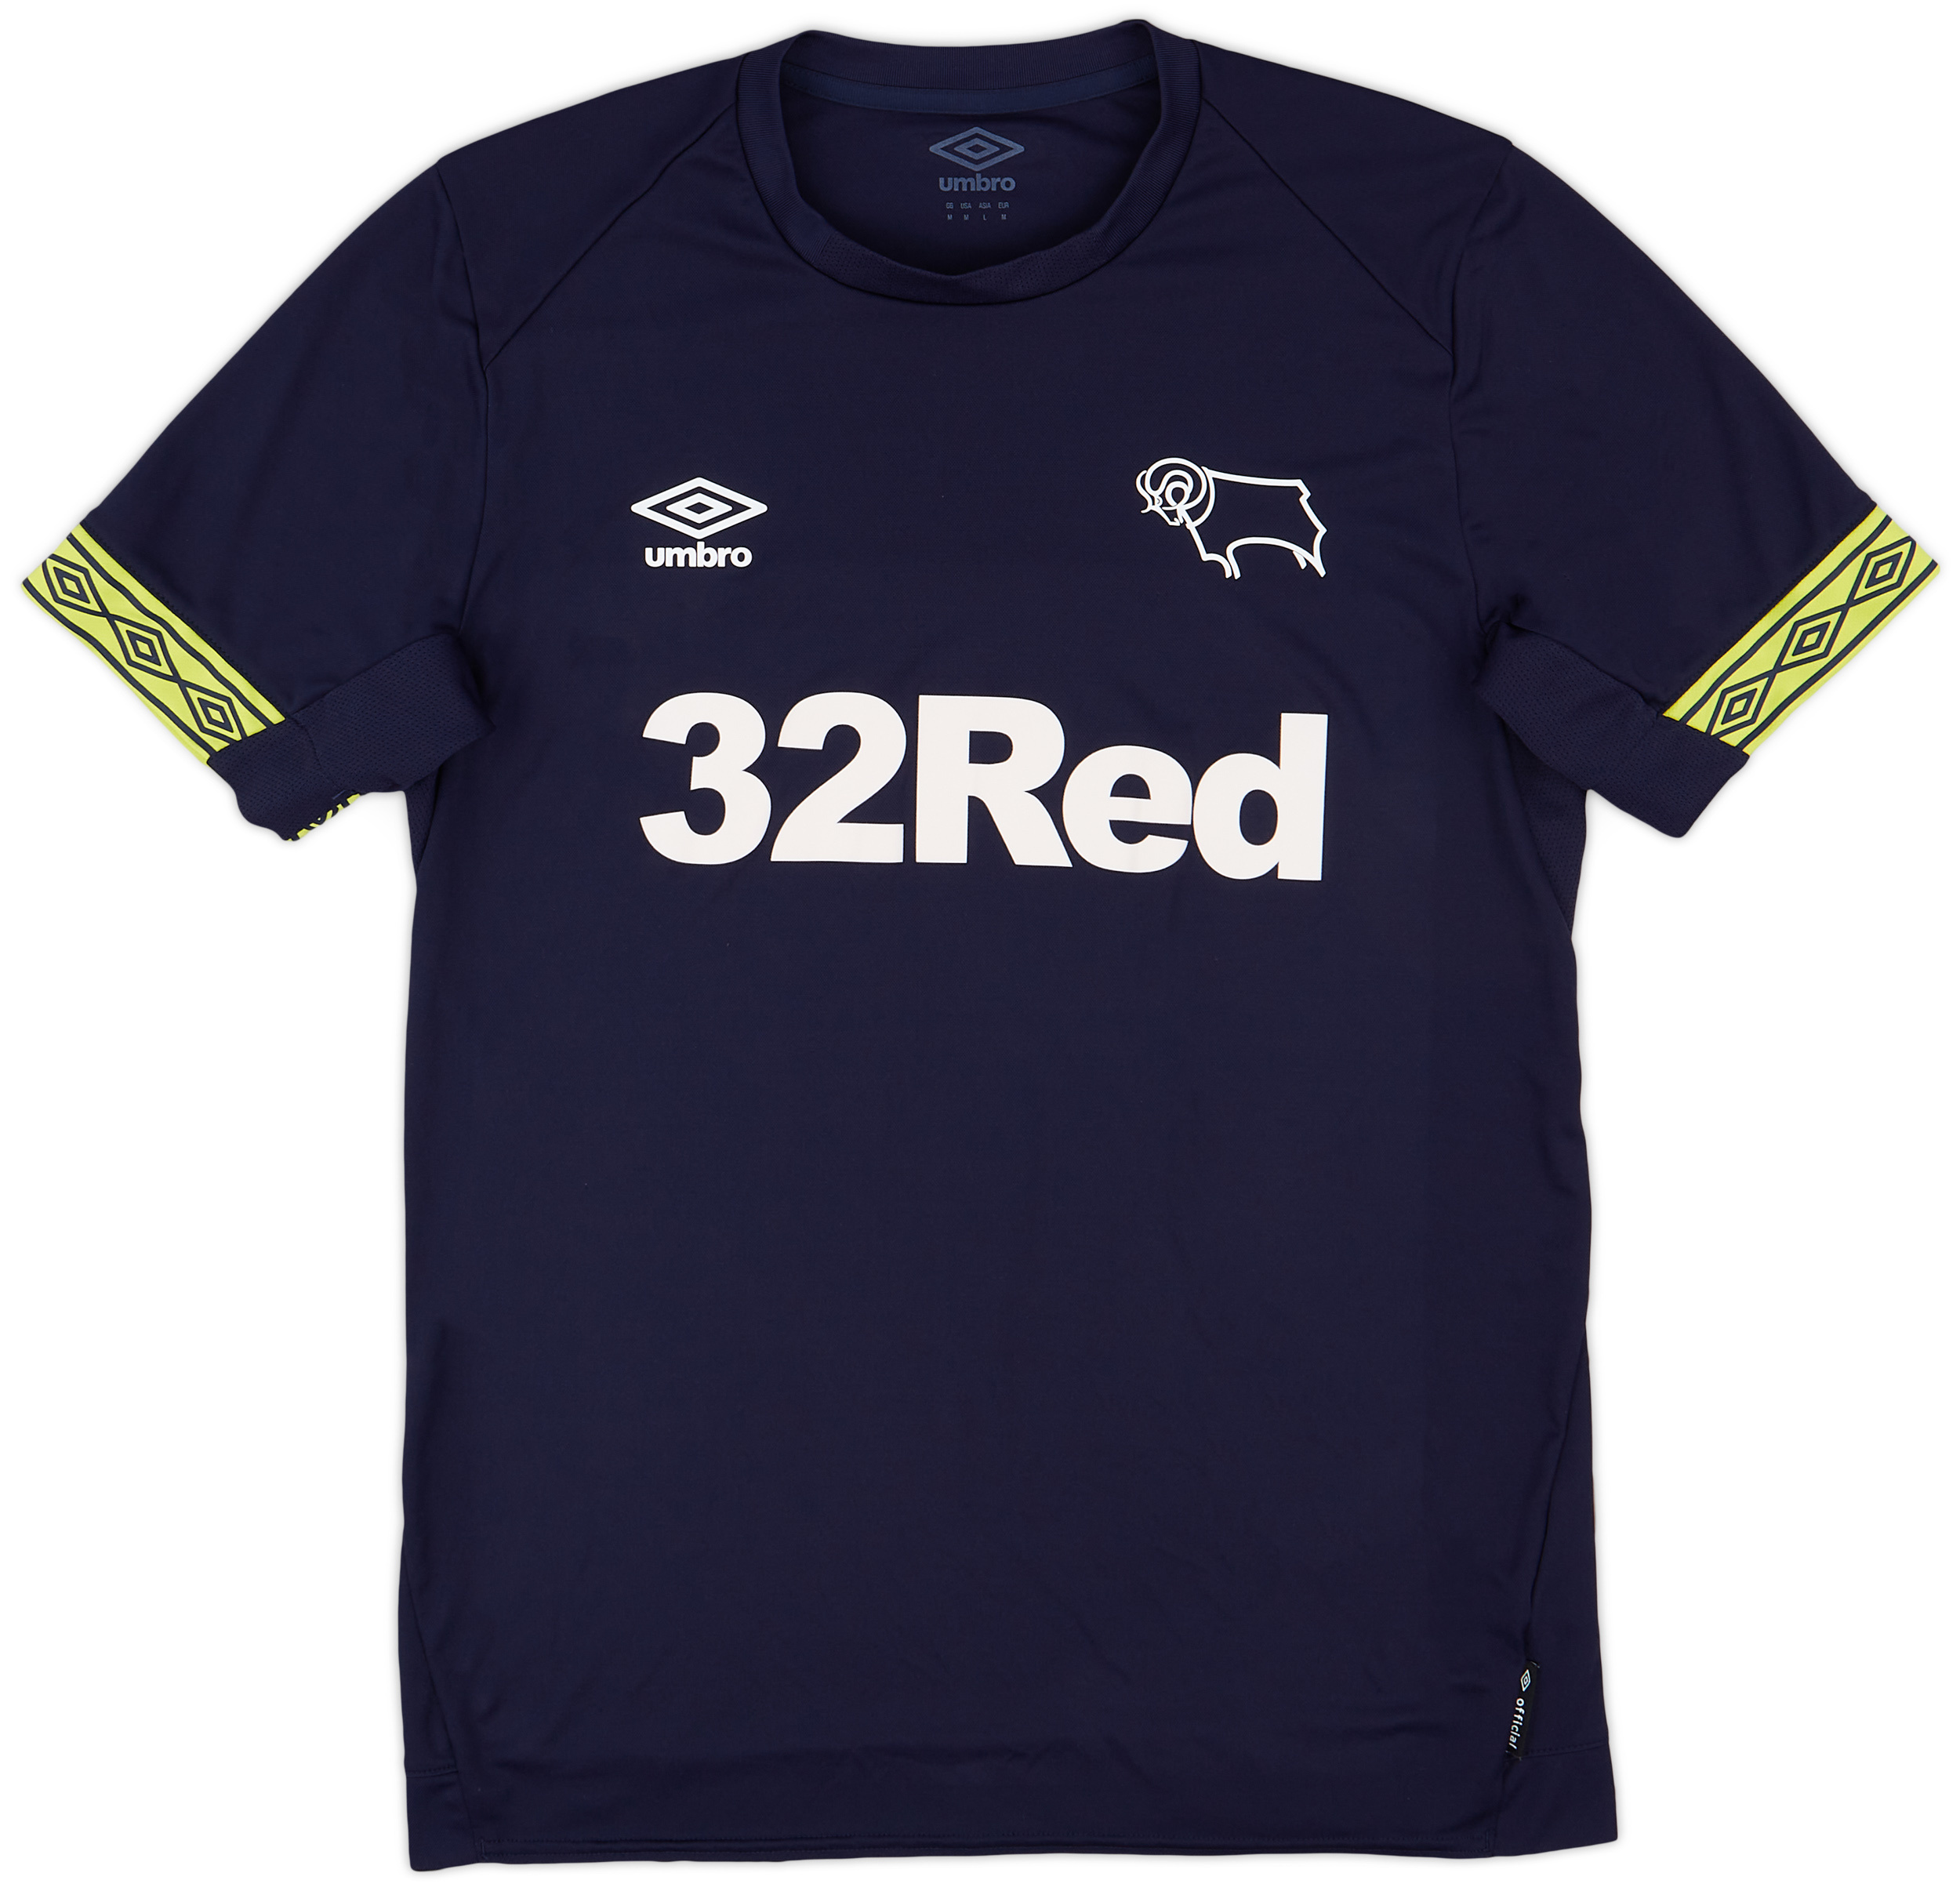 2018-19 Derby County Away Shirt - 8/10 - ()